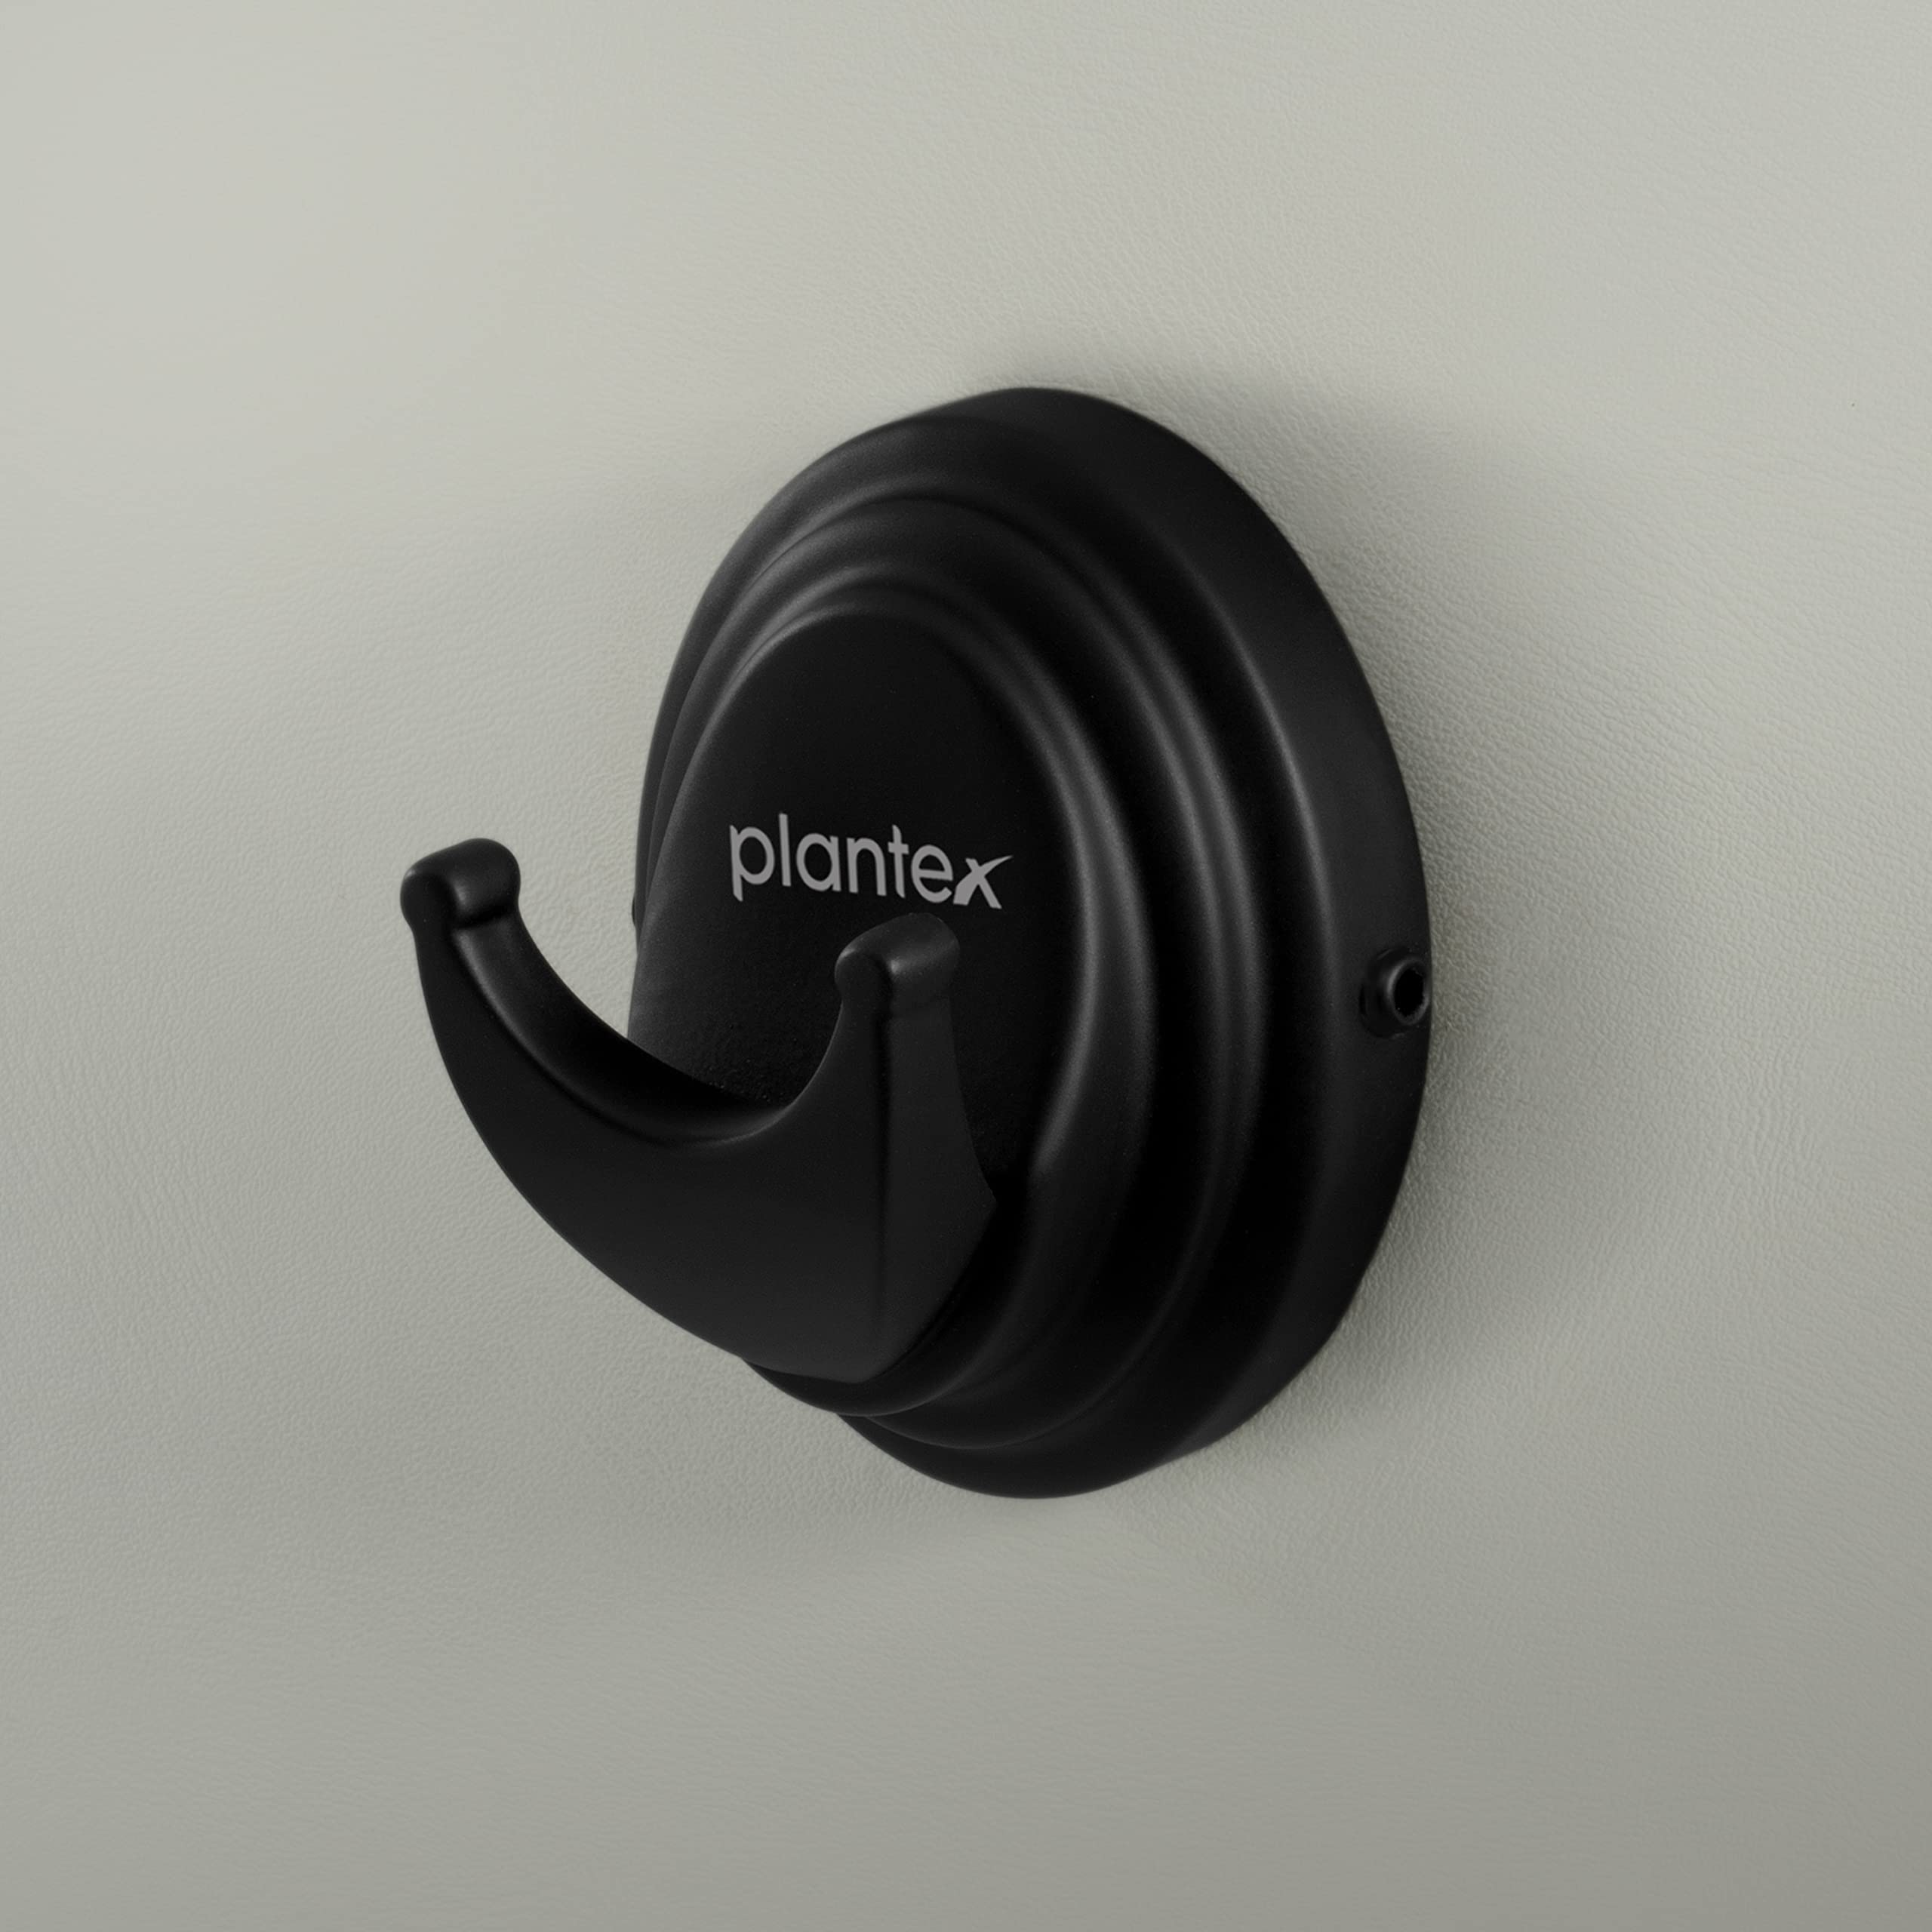 Plantex Cubic Black Bathroom Hooks for Hanging Towel and Clothes in Bathroom/washroom (304 Stainless Steel)